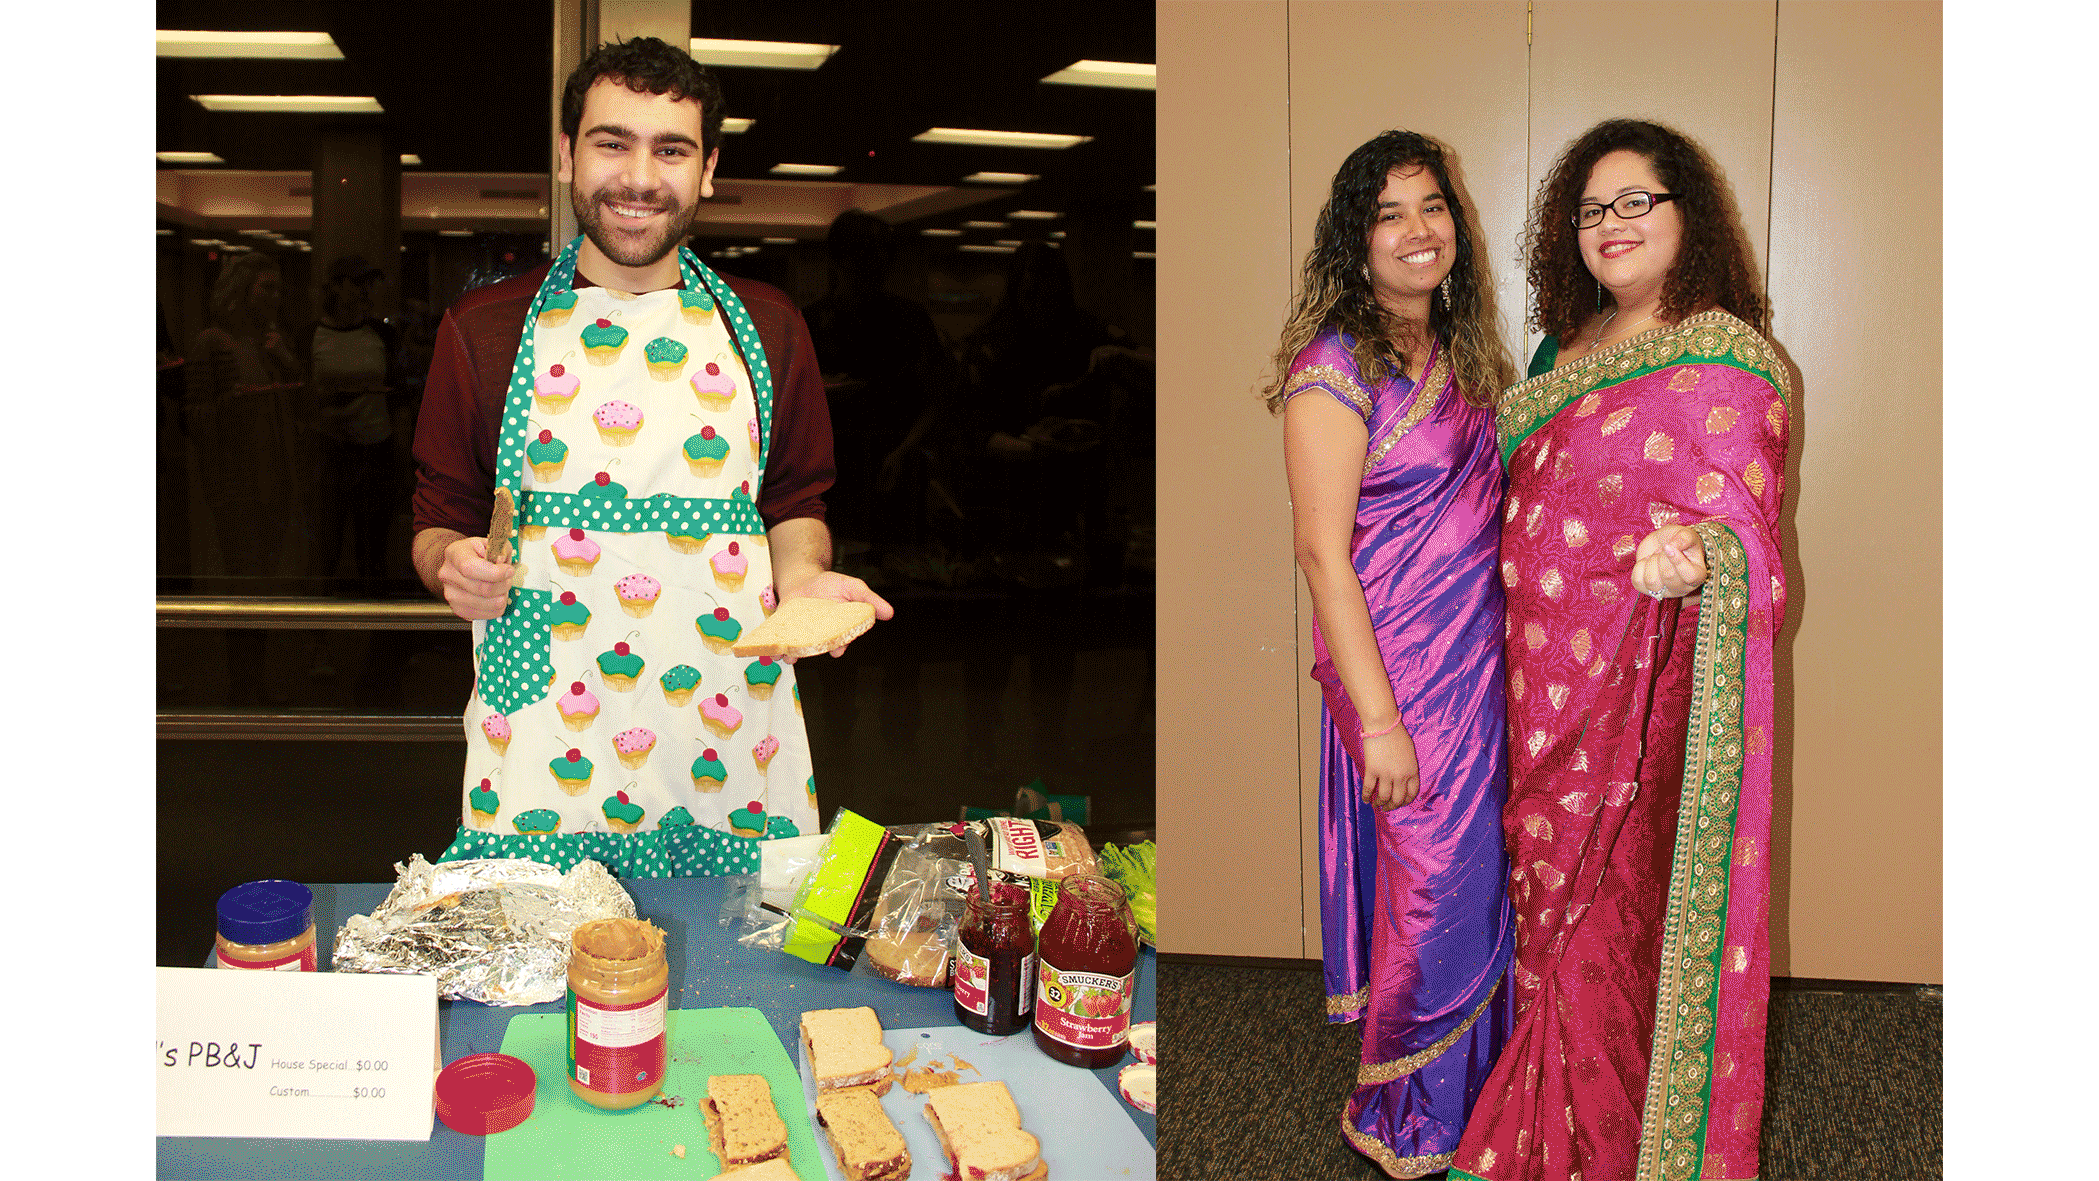 Student preparing peanut butter and jelly sandwiches and two students in traditional Indian saris.